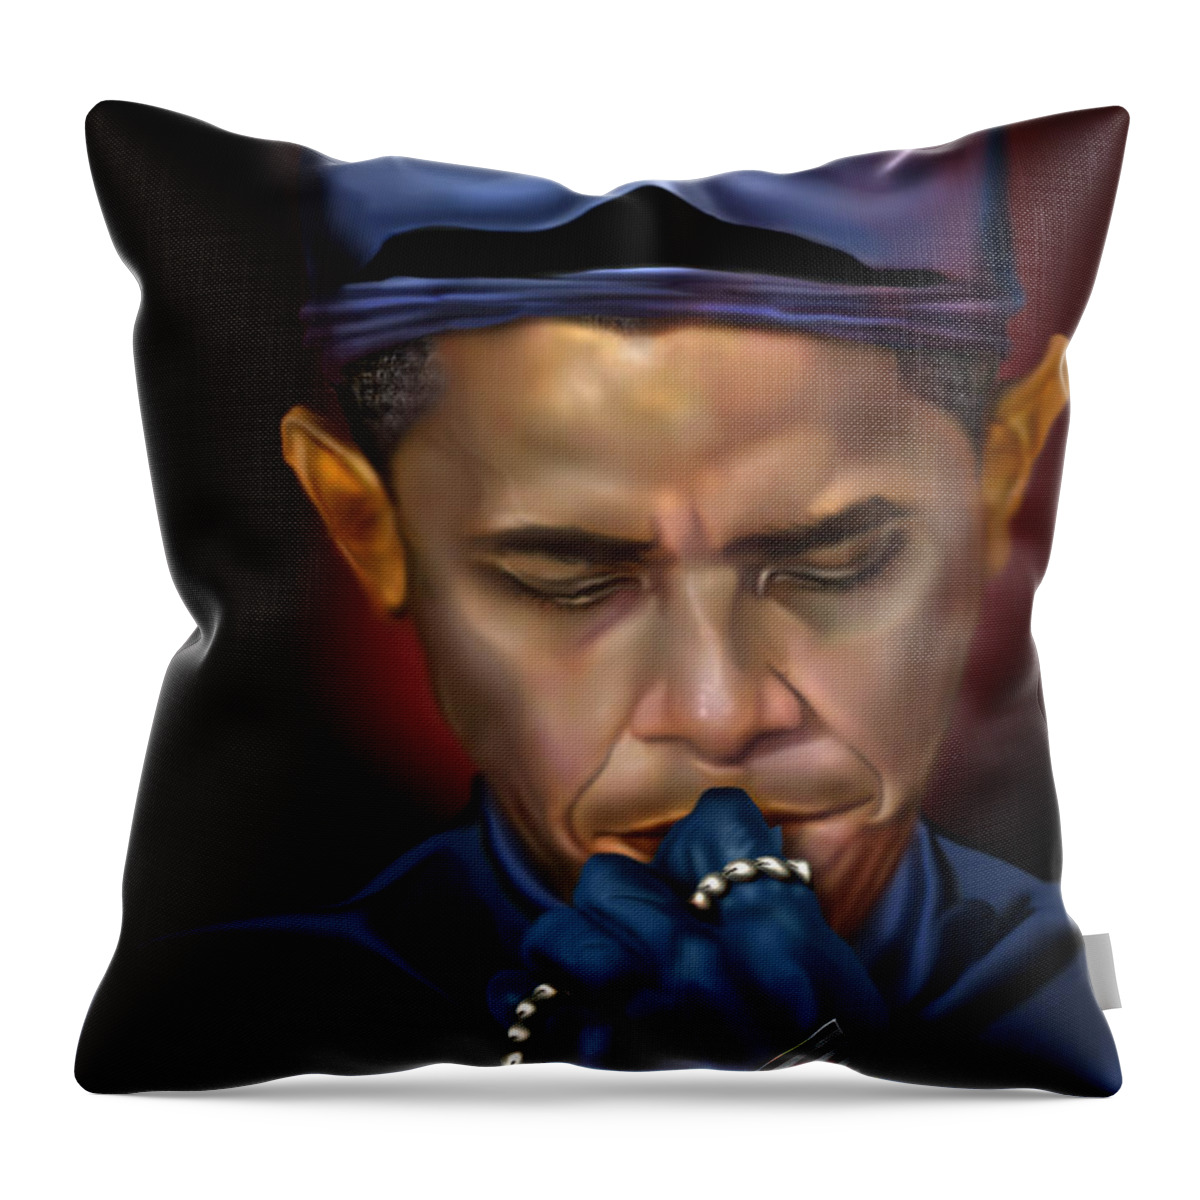  President Barack Obama Throw Pillow featuring the painting Mad Men Series 1 of 6 - President Obama The Dark Knight by Reggie Duffie